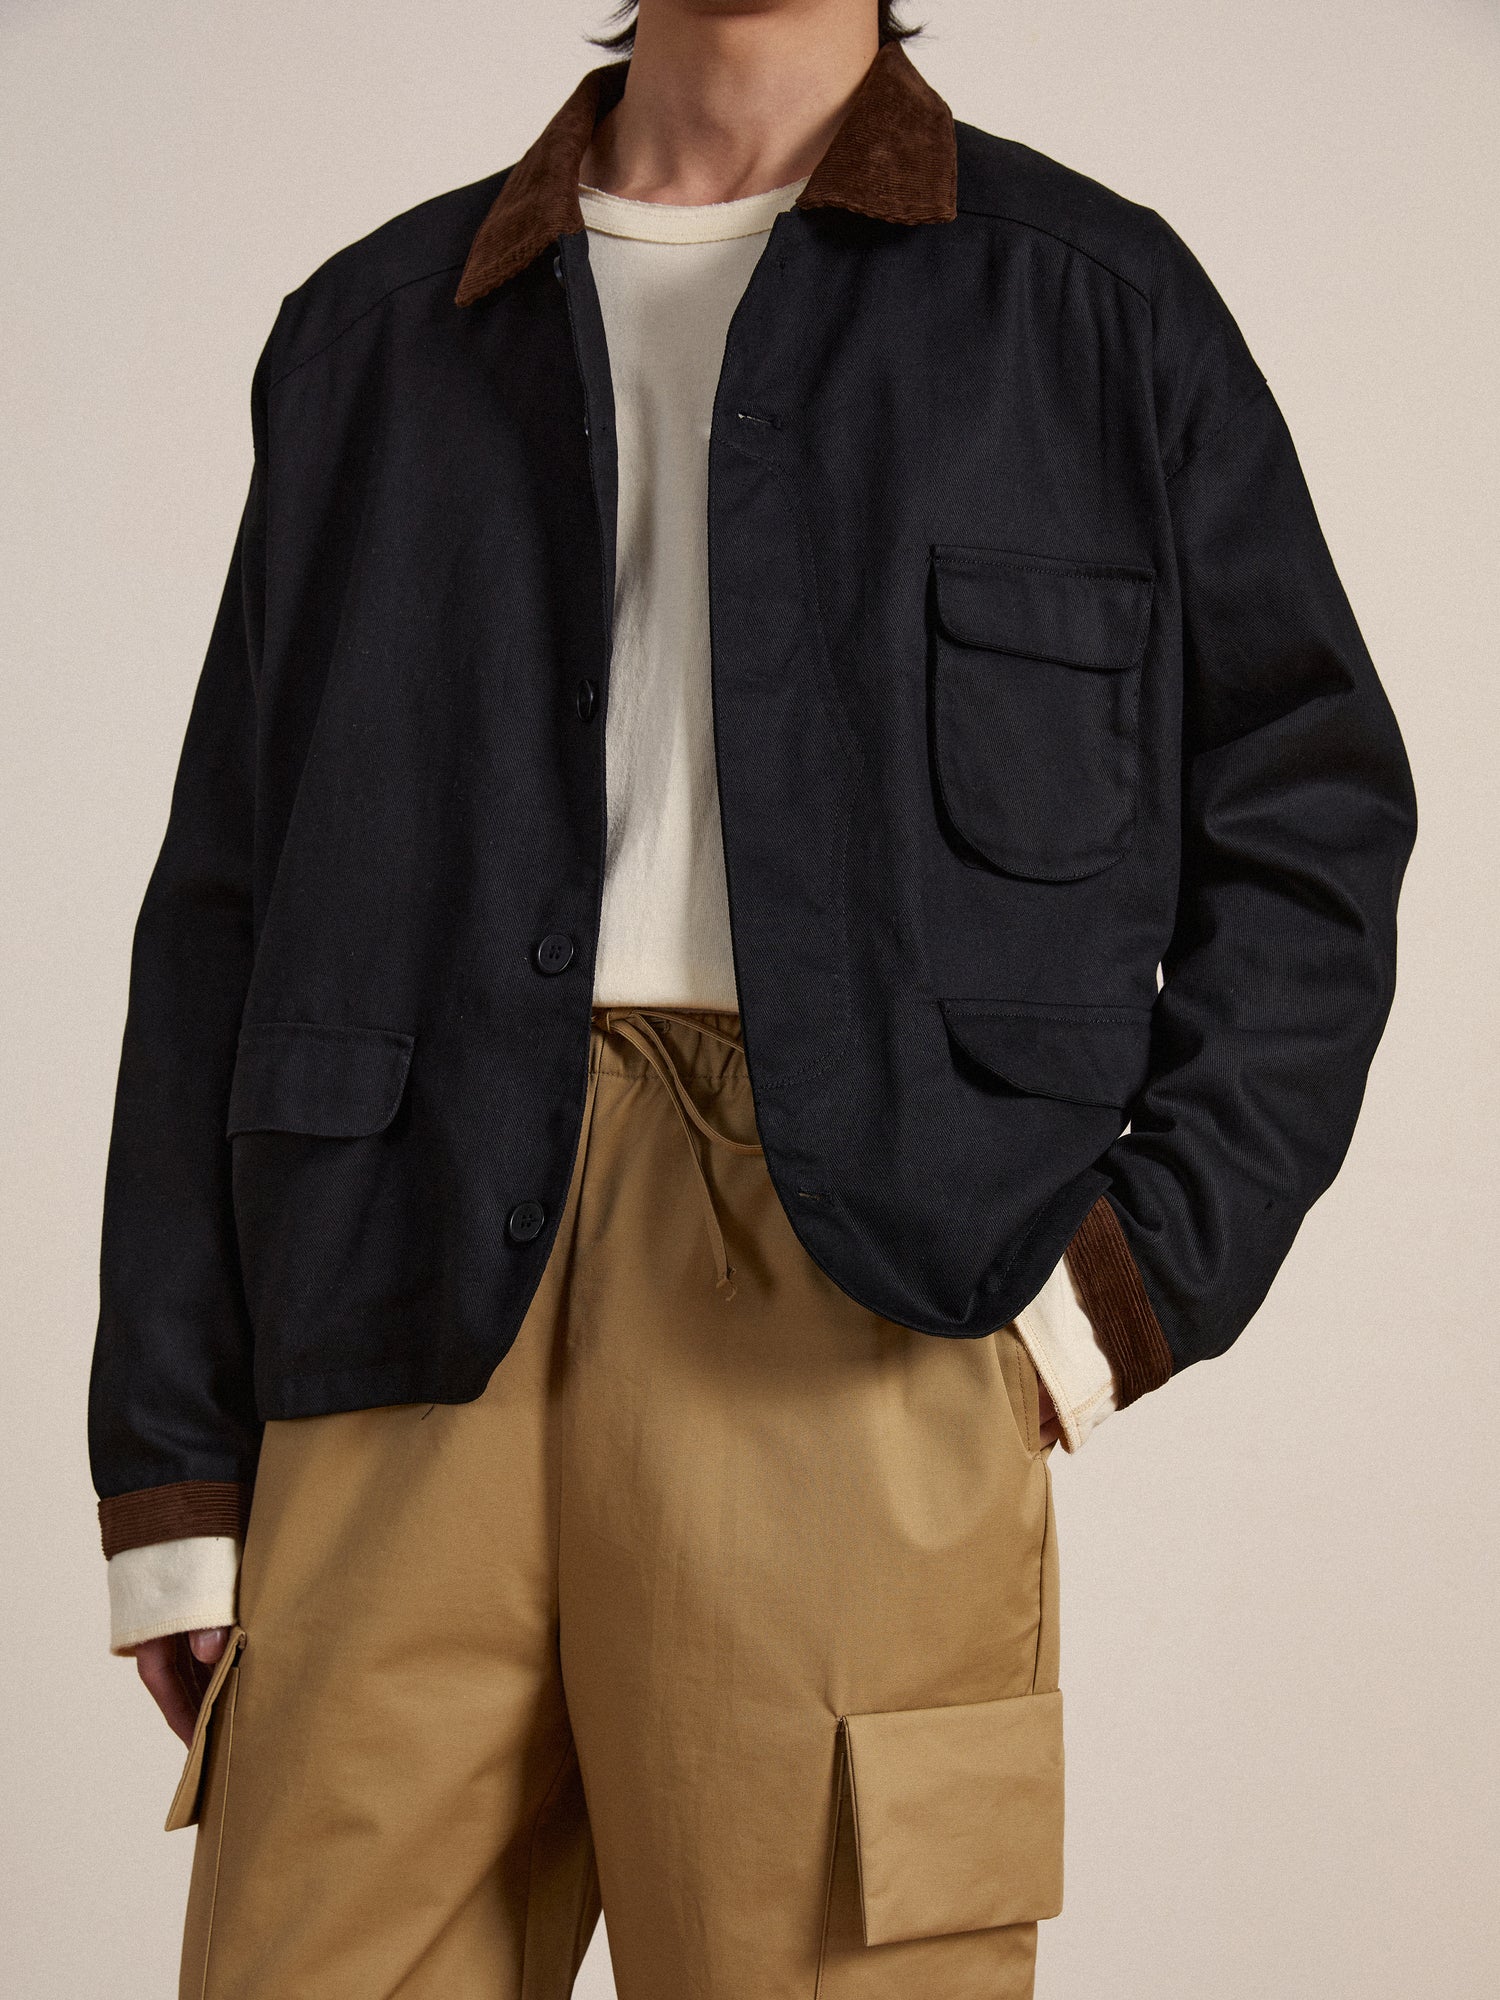 The model is wearing a Found Lar Waxed Cotton Box Coat and tan cargo pants.